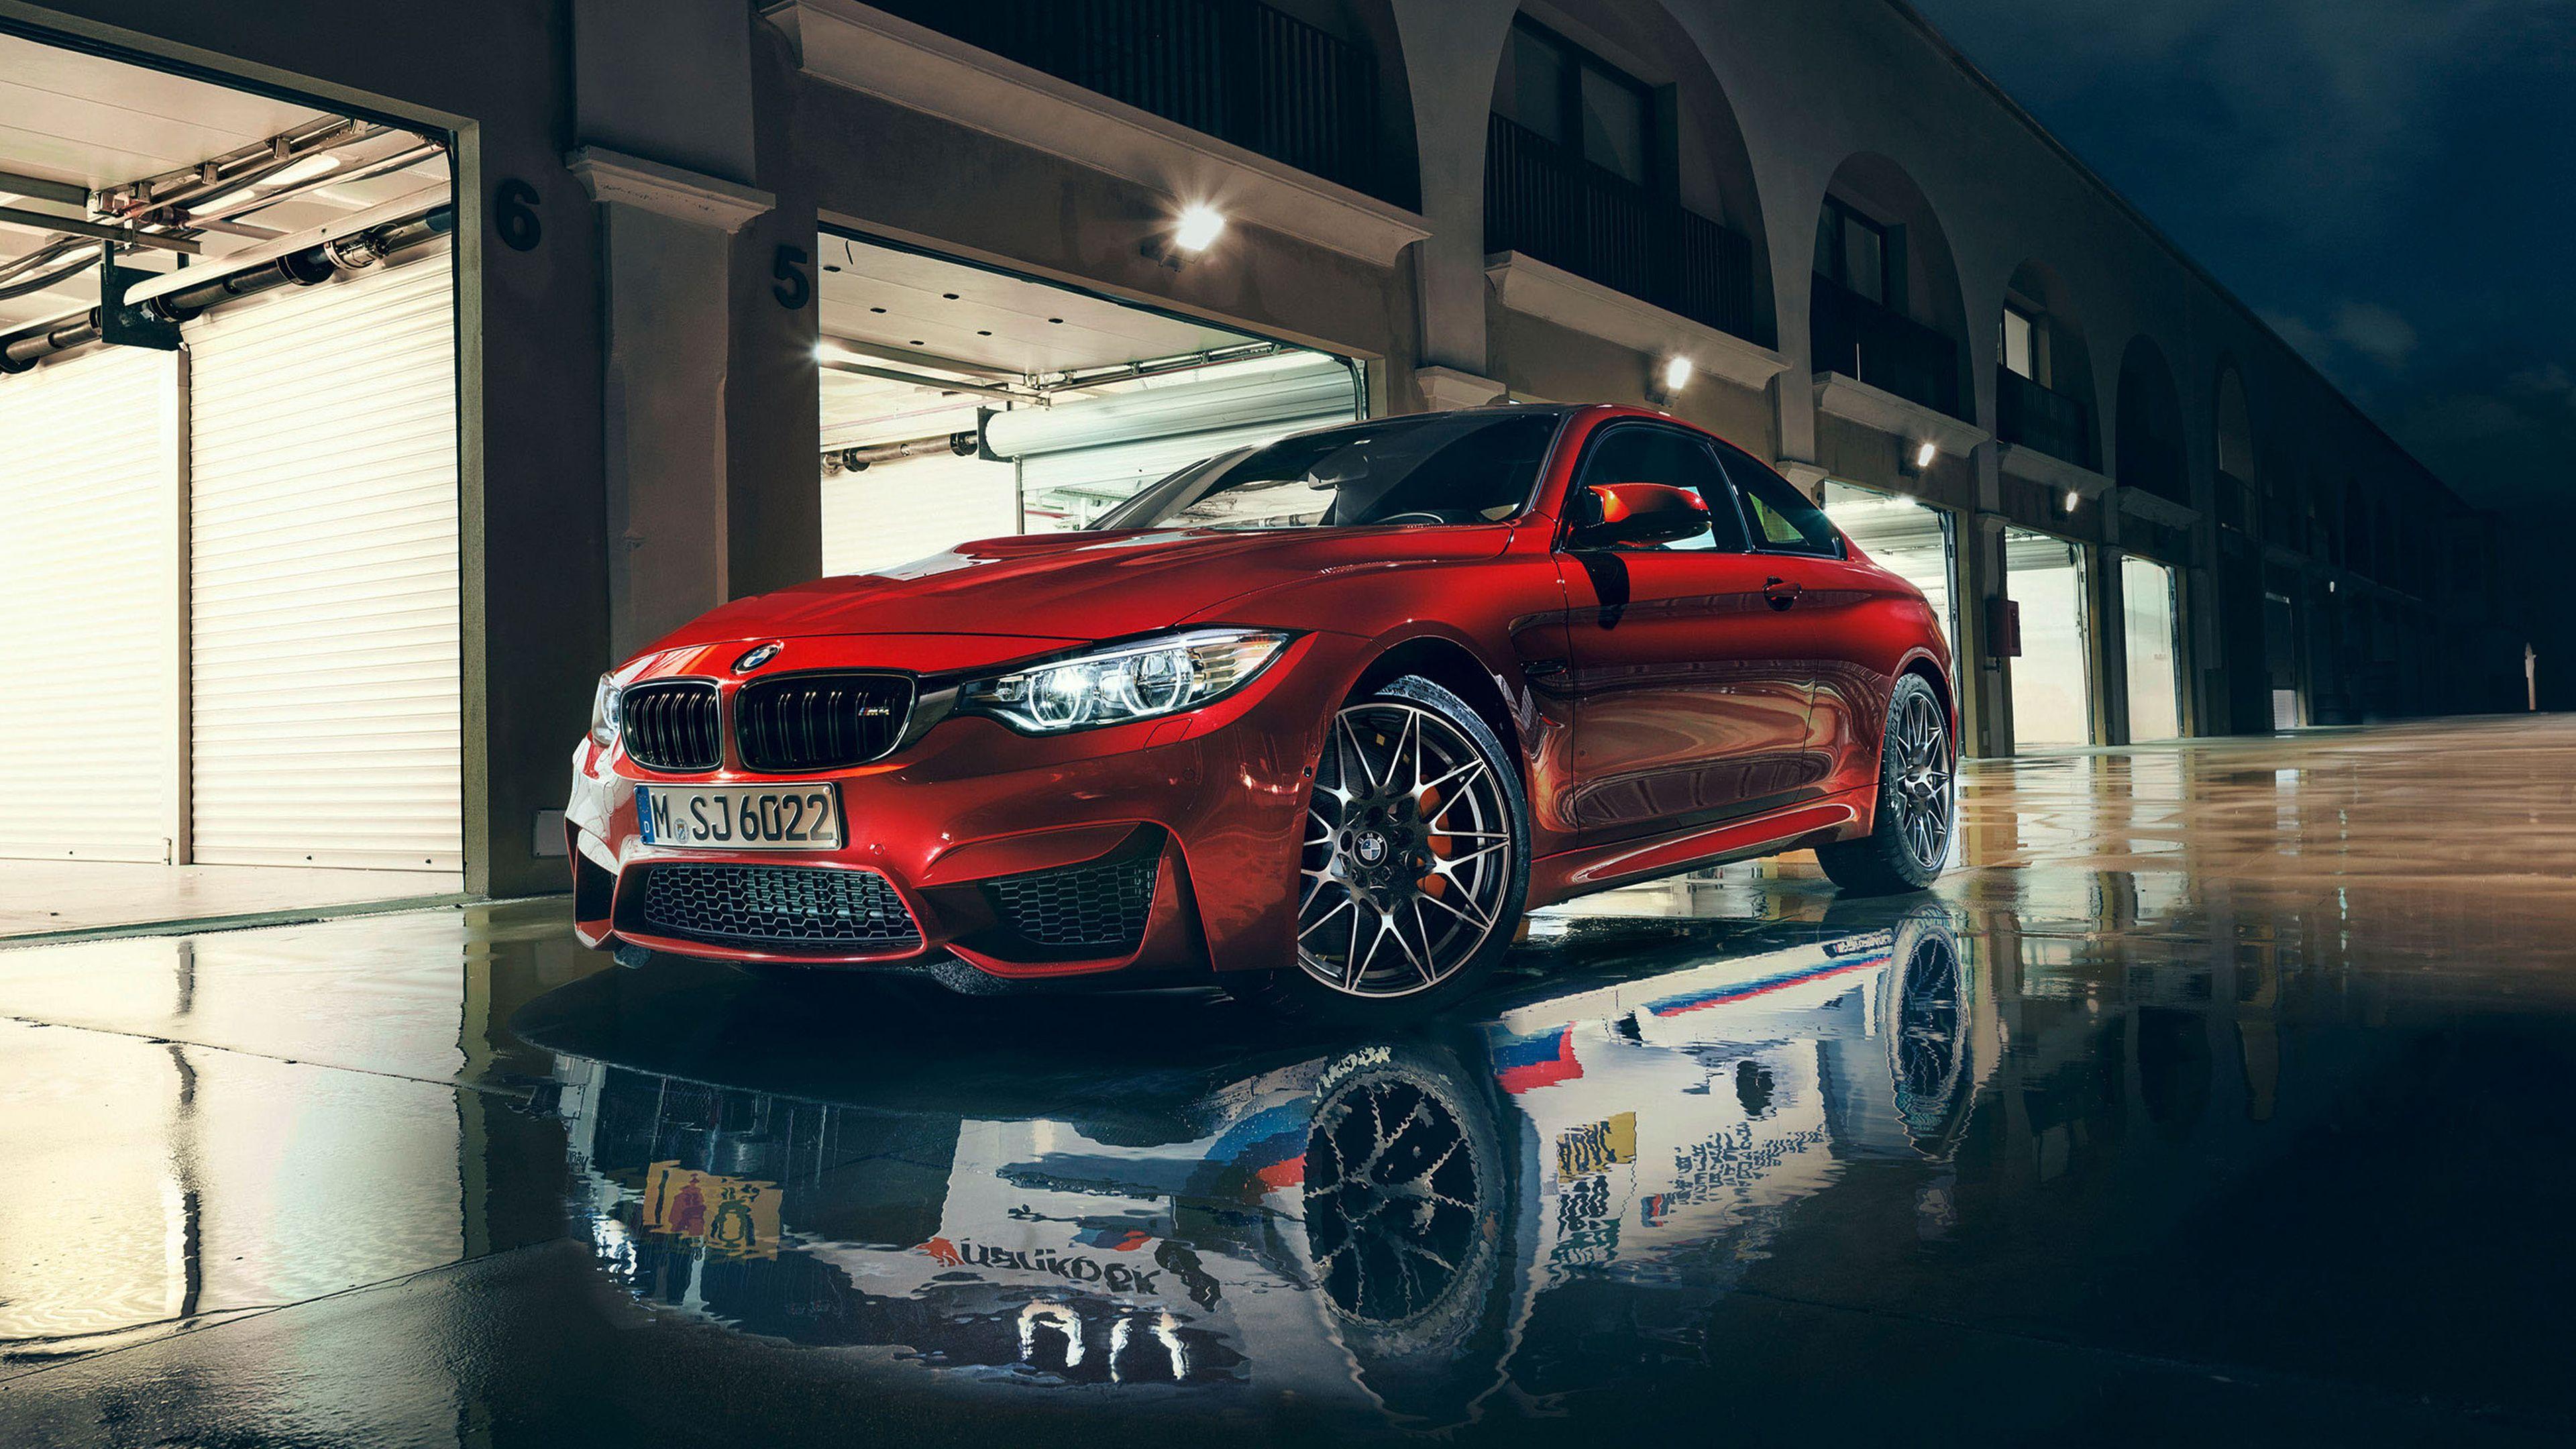 Wallpaper ID 296586  Vehicles BMW M5 Competition Phone Wallpaper   2160x3840 free download